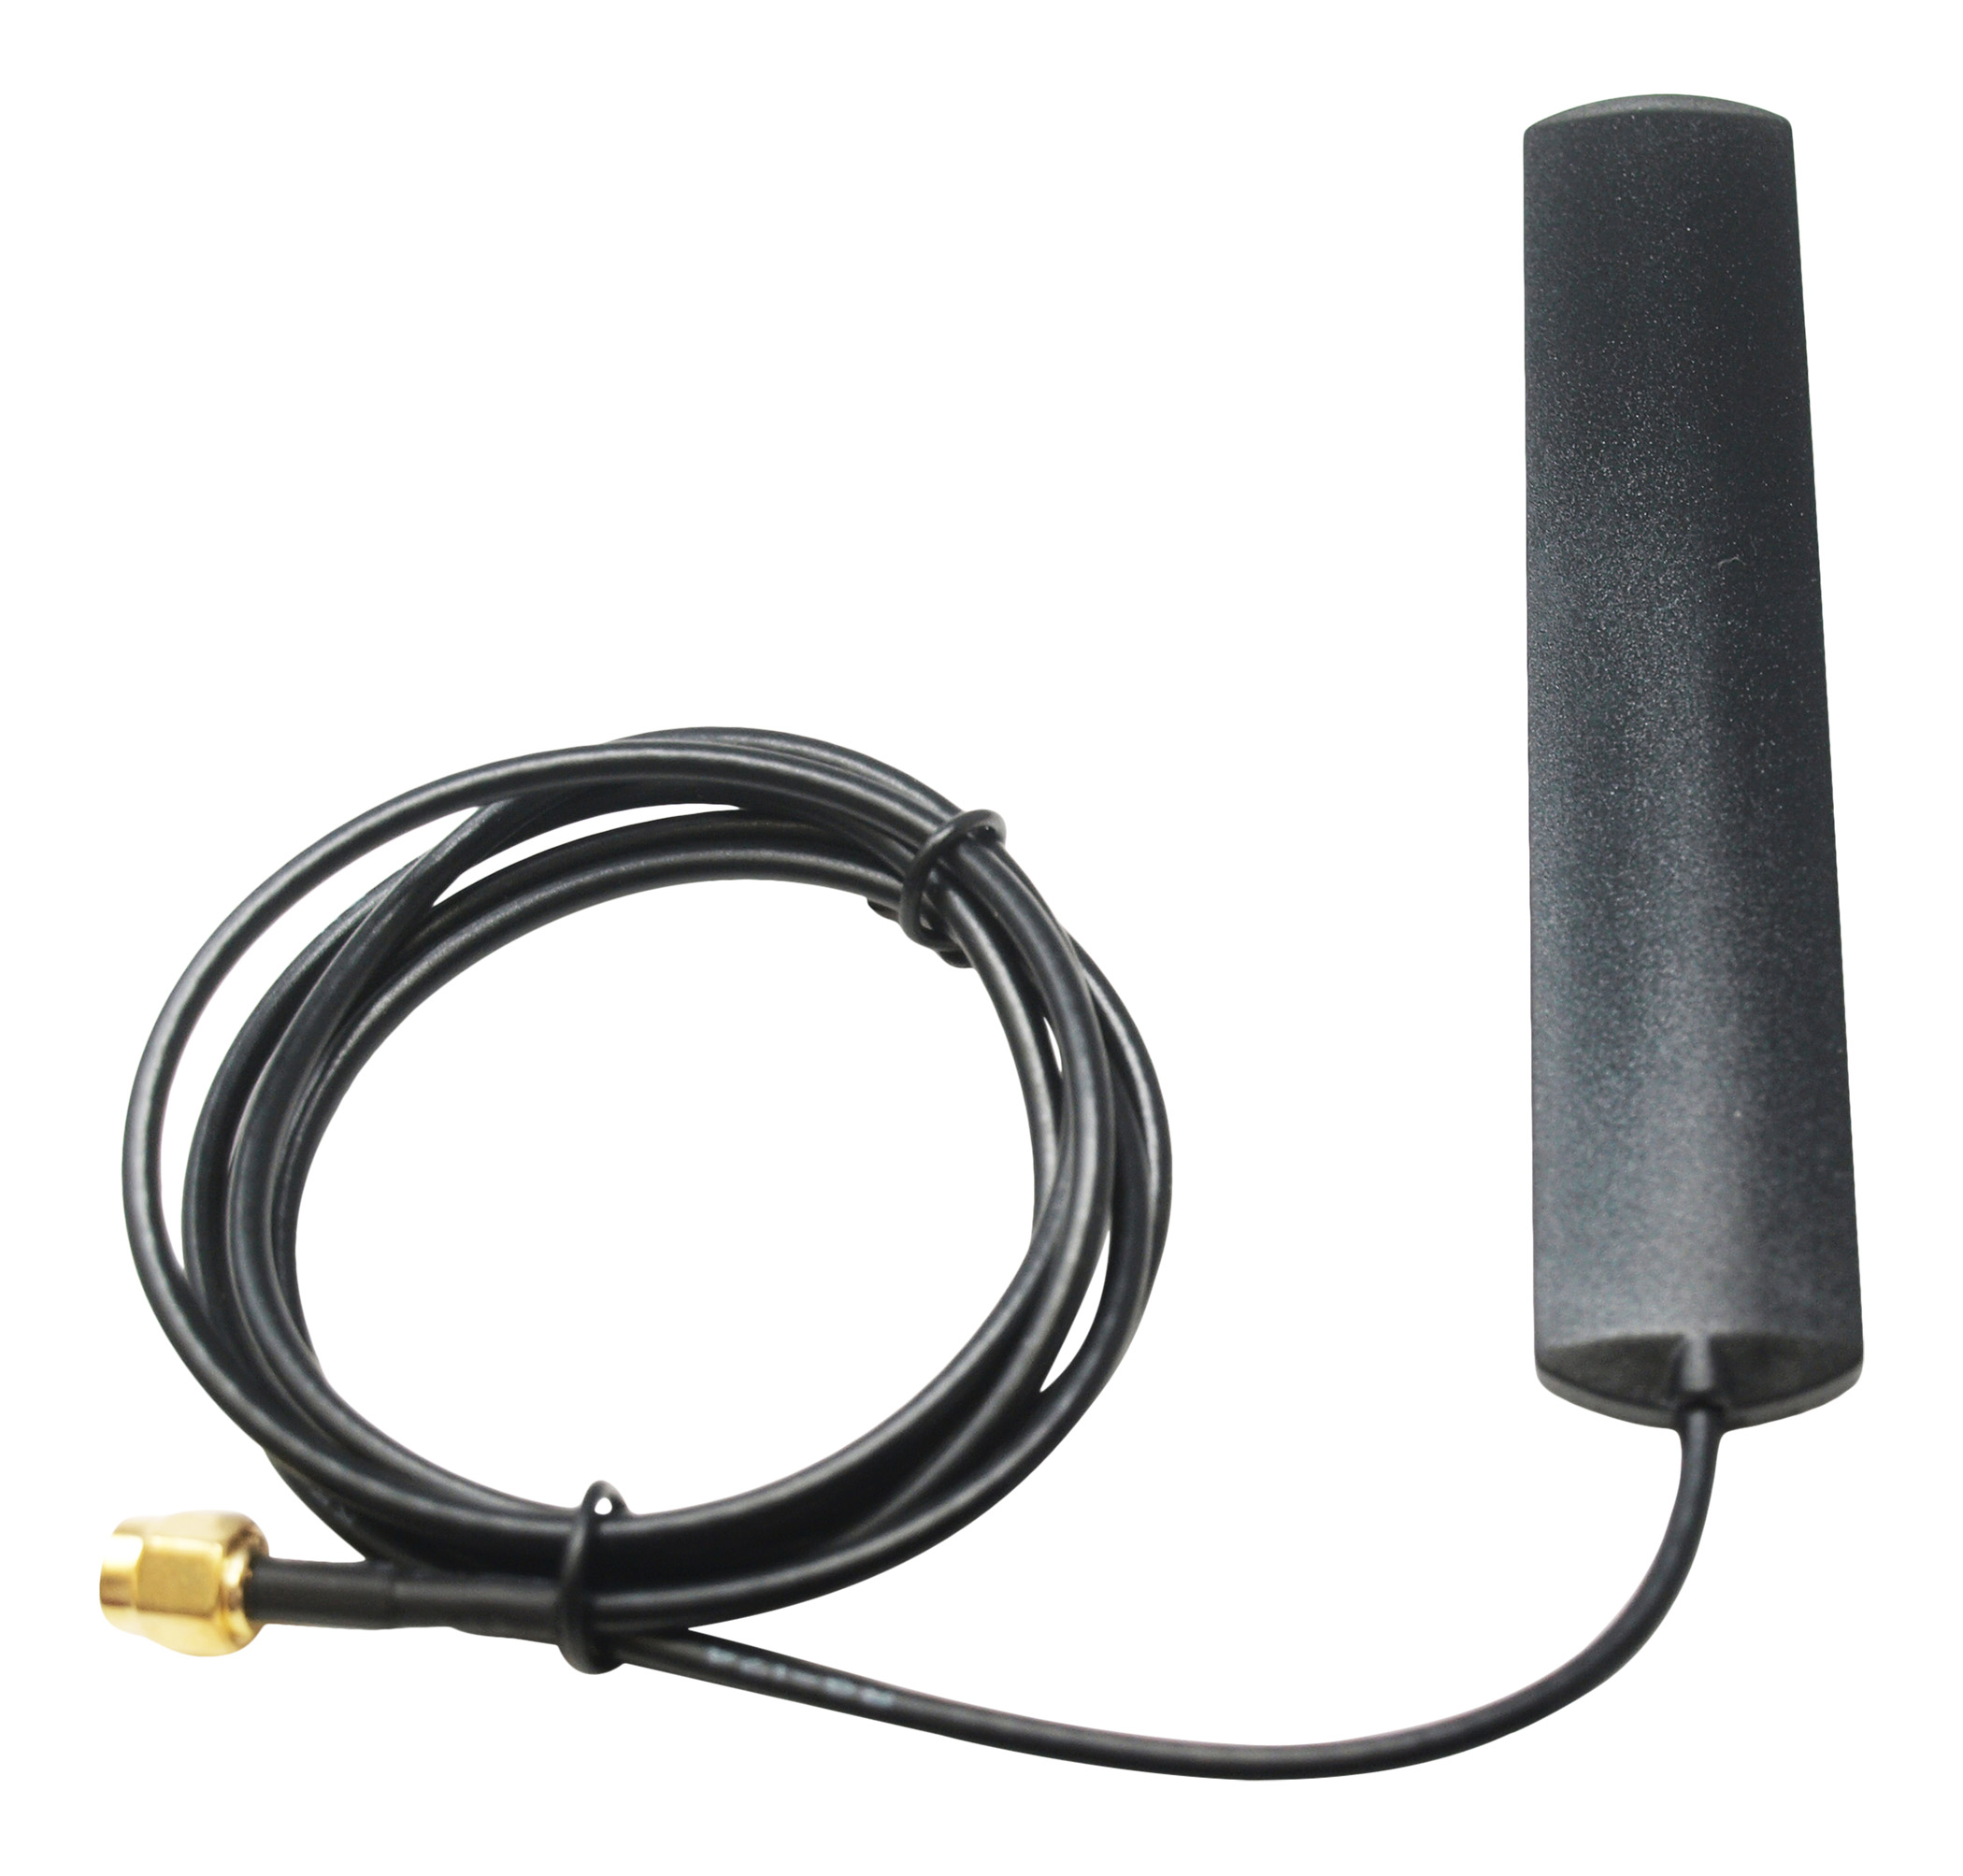 20417 Antennae Extender For Boat Security System, 45" long